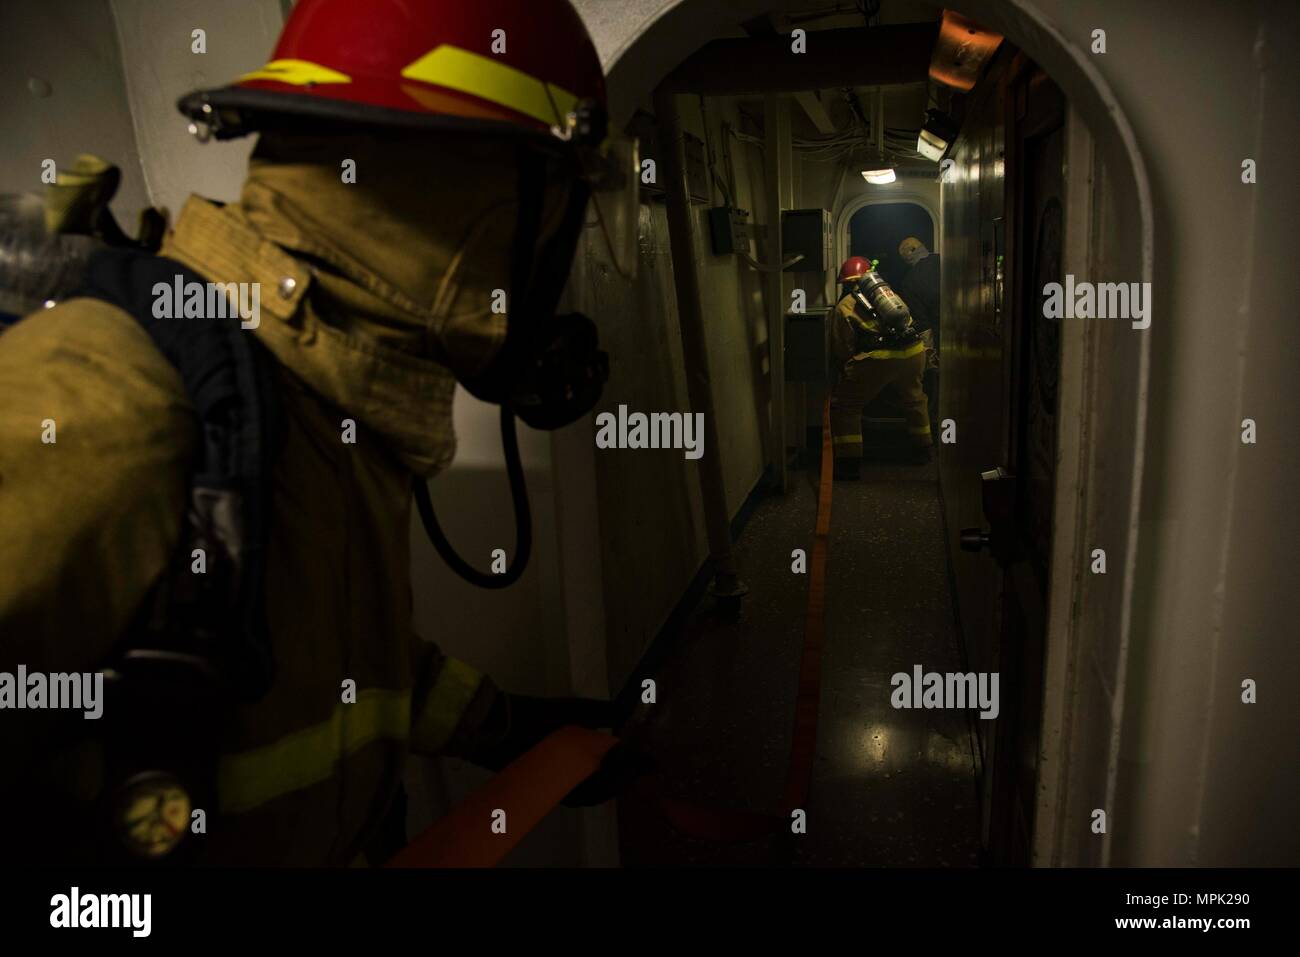 170208-N-KJ380-072    ATLANTIC OCEAN (Feb. 8, 2017) Mass Communication Specialist 3rd Class Robert Baldock, left, enters a space with the hose team in a passageway aboard the aircraft carrier USS Dwight D. Eisenhower (CVN 69) (Ike) during a general quarters drill. Ike is currently conducting aircraft carrier qualifications during the sustainment phase of the Optimized Fleet Response Plan (OFRP). (U.S. Navy photo by Mass Communication Specialist Seaman Neo Greene III) Stock Photo